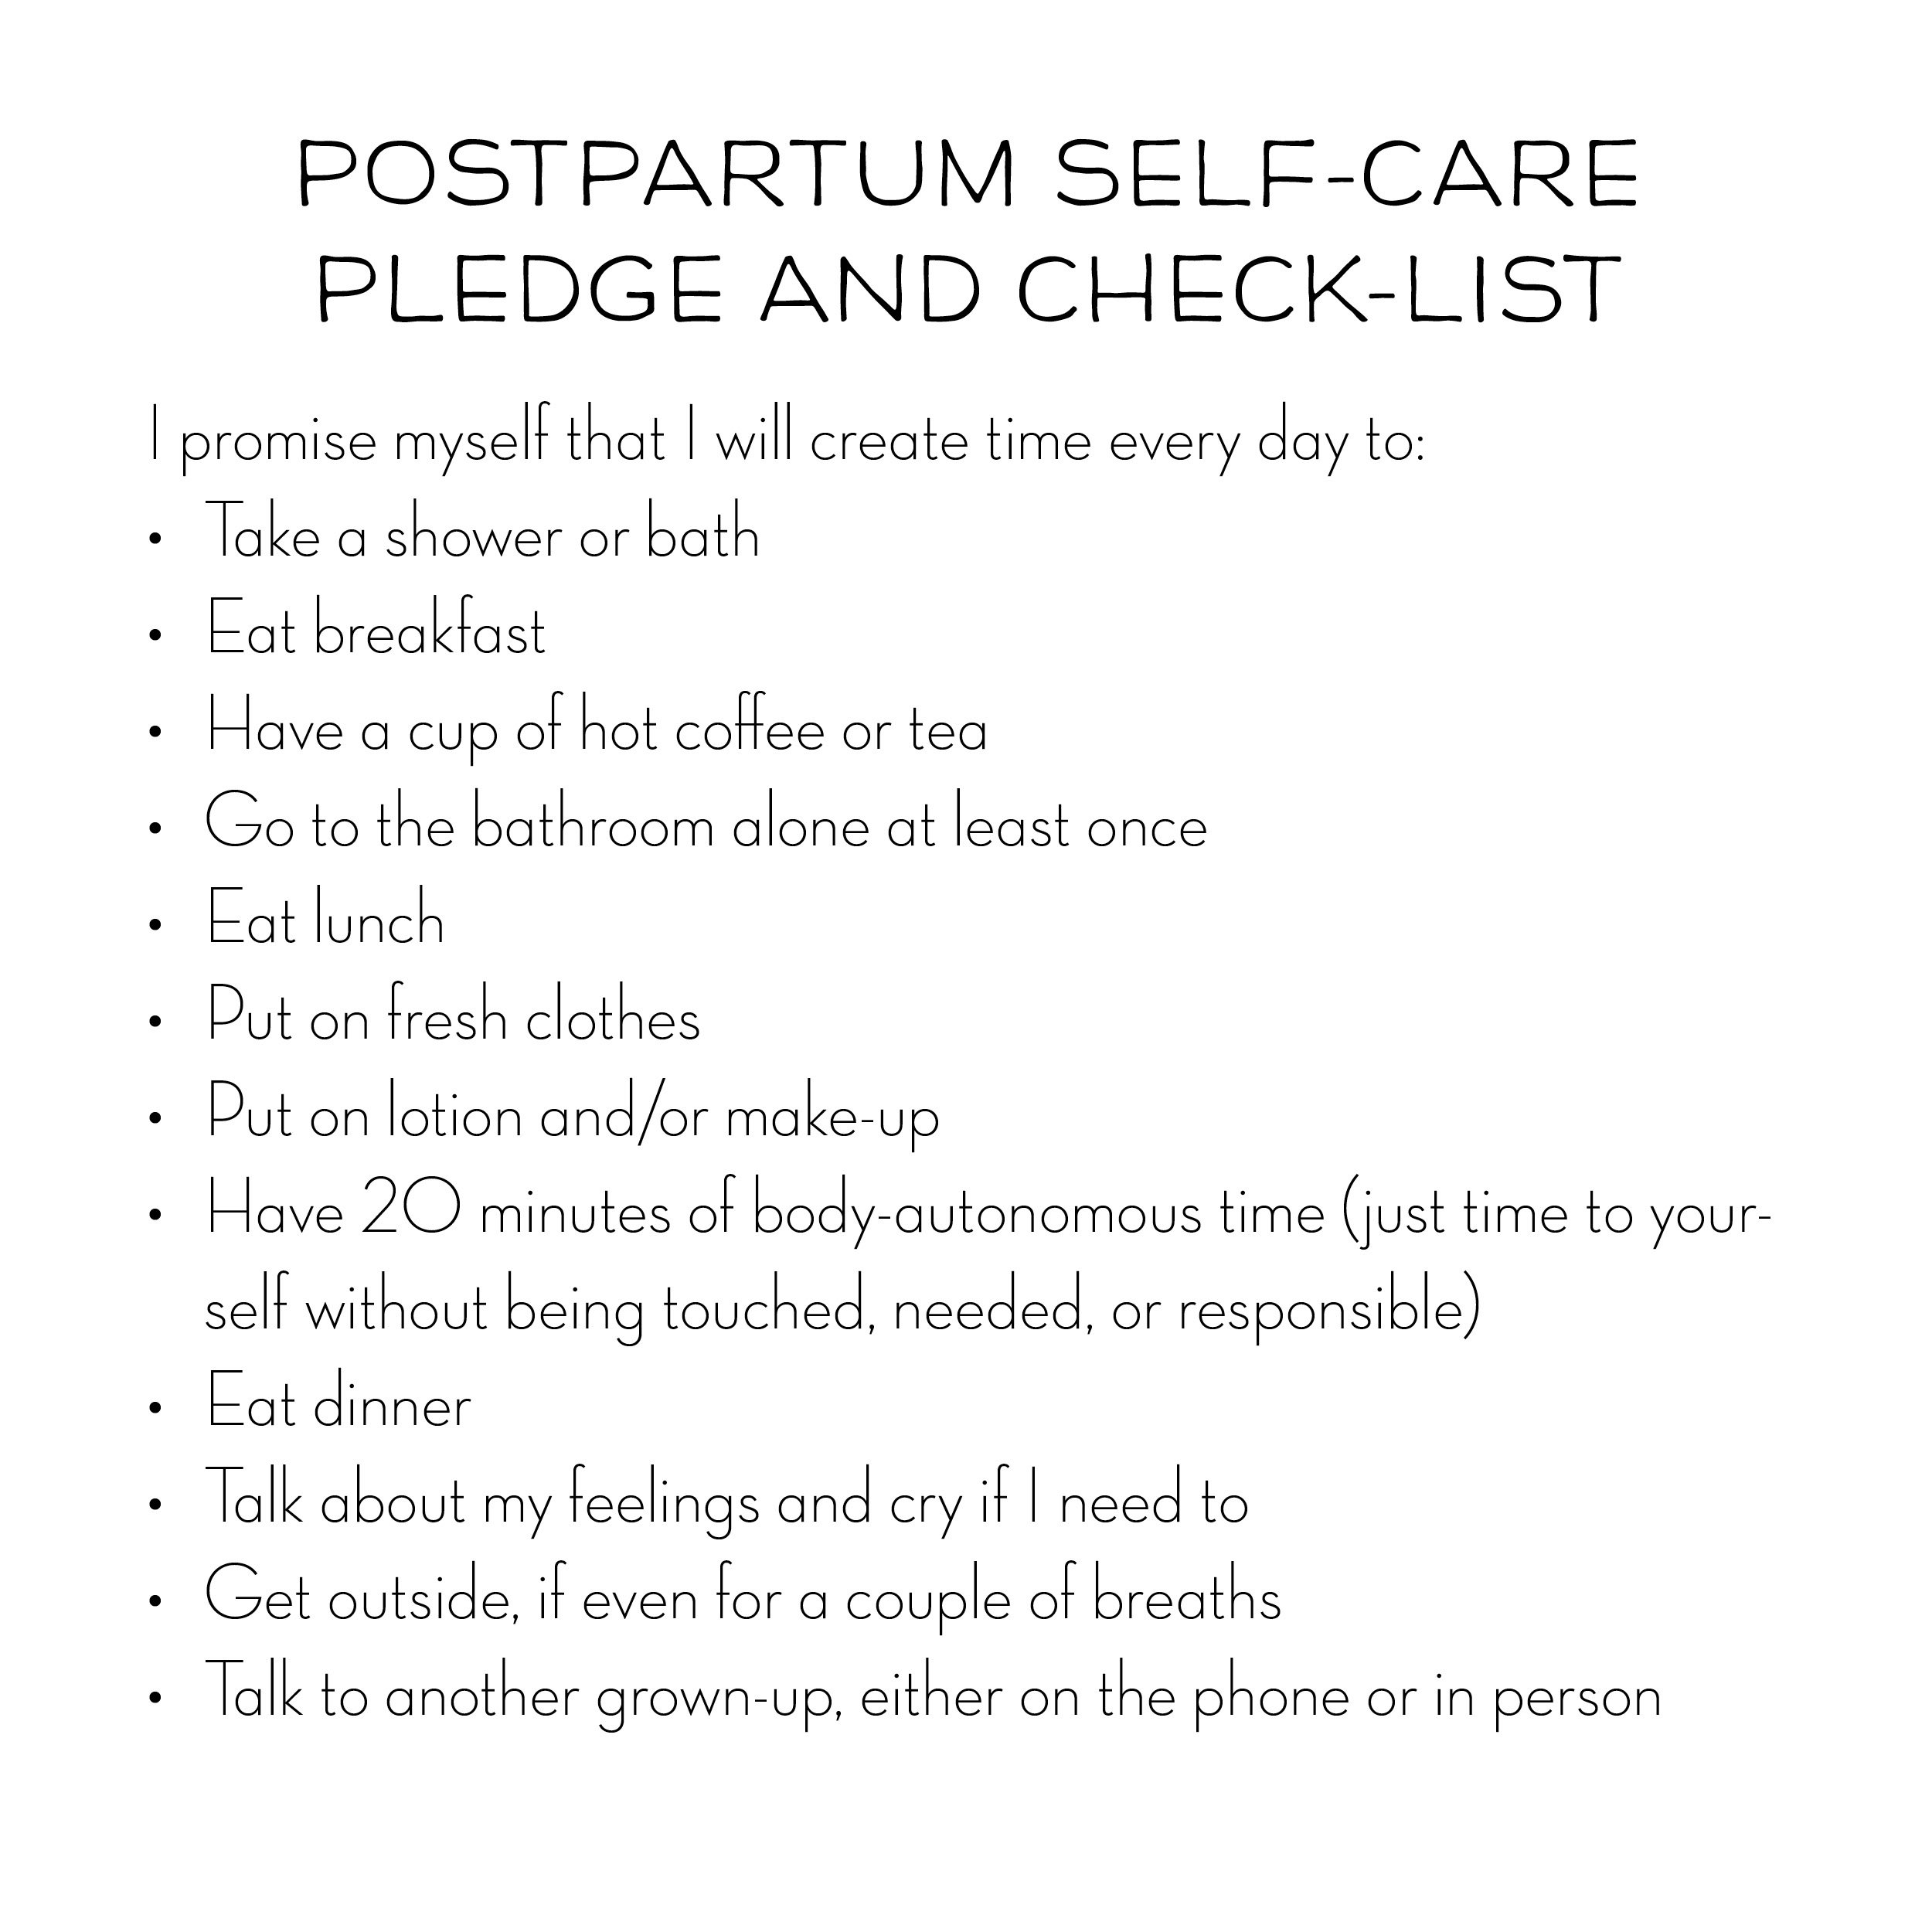 Postpartum care: why it's neglected and what we want to do about it